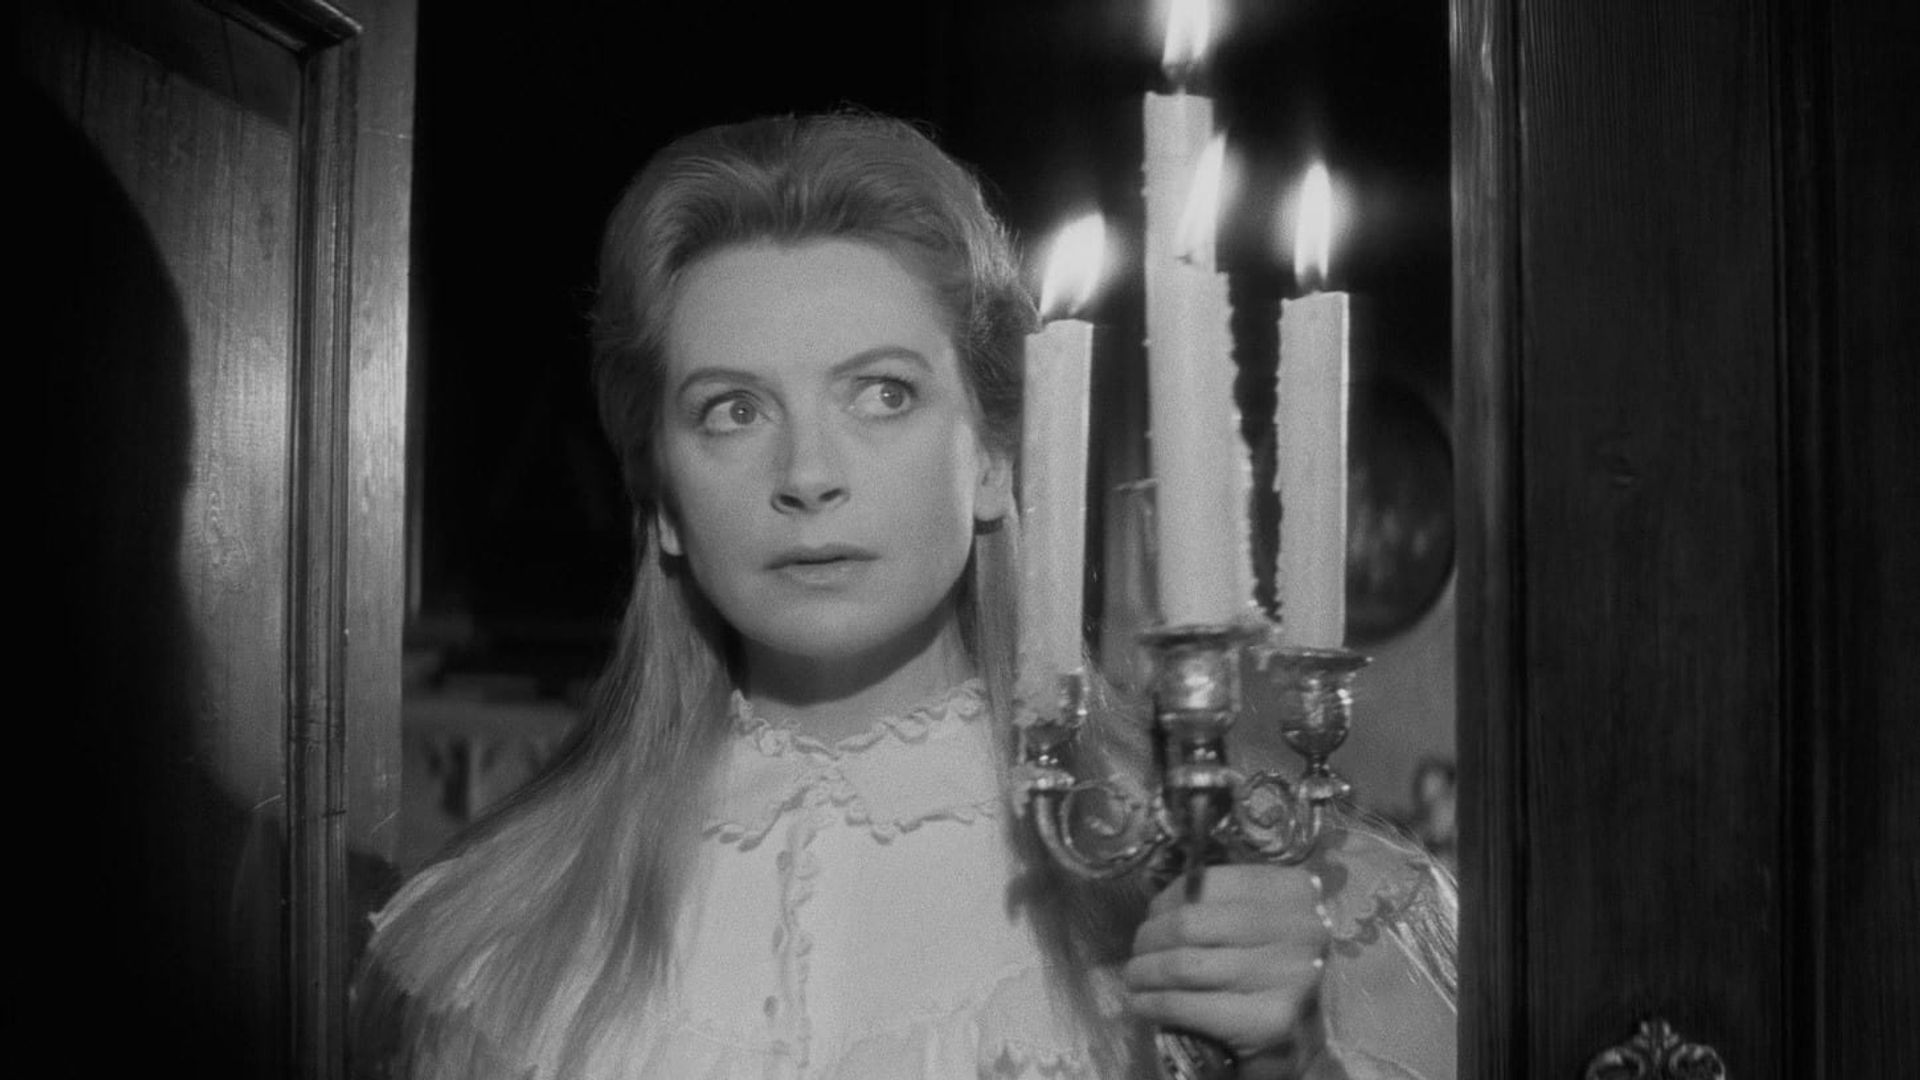 Still from film THE INNOCENTS with a white woman with long blond hair and an old-fashioned nightgown, holding a large candelabra, peering apprehensively beyond the camera